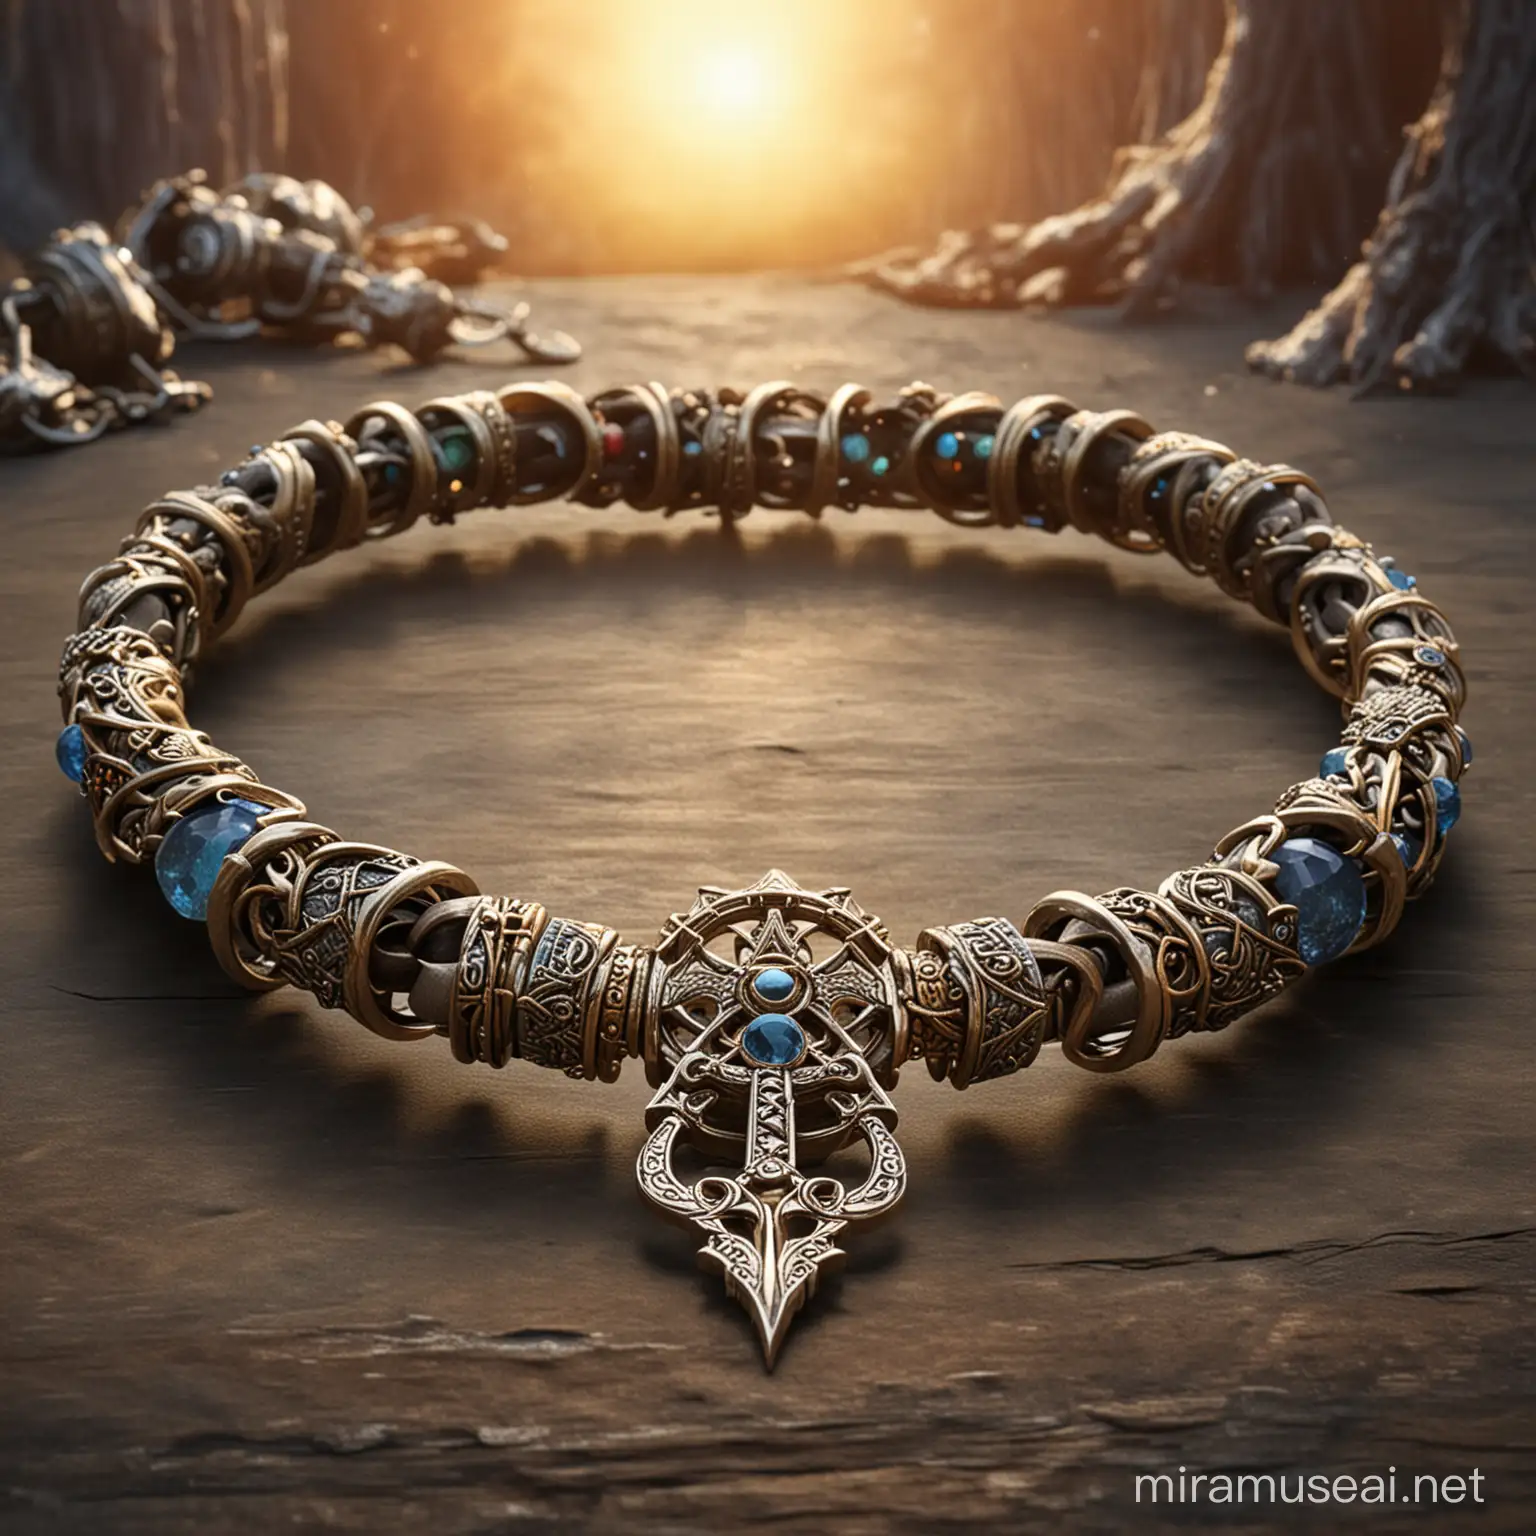 Epic Battle of Sorcery Confronting Darkness with Mystic Bracelet